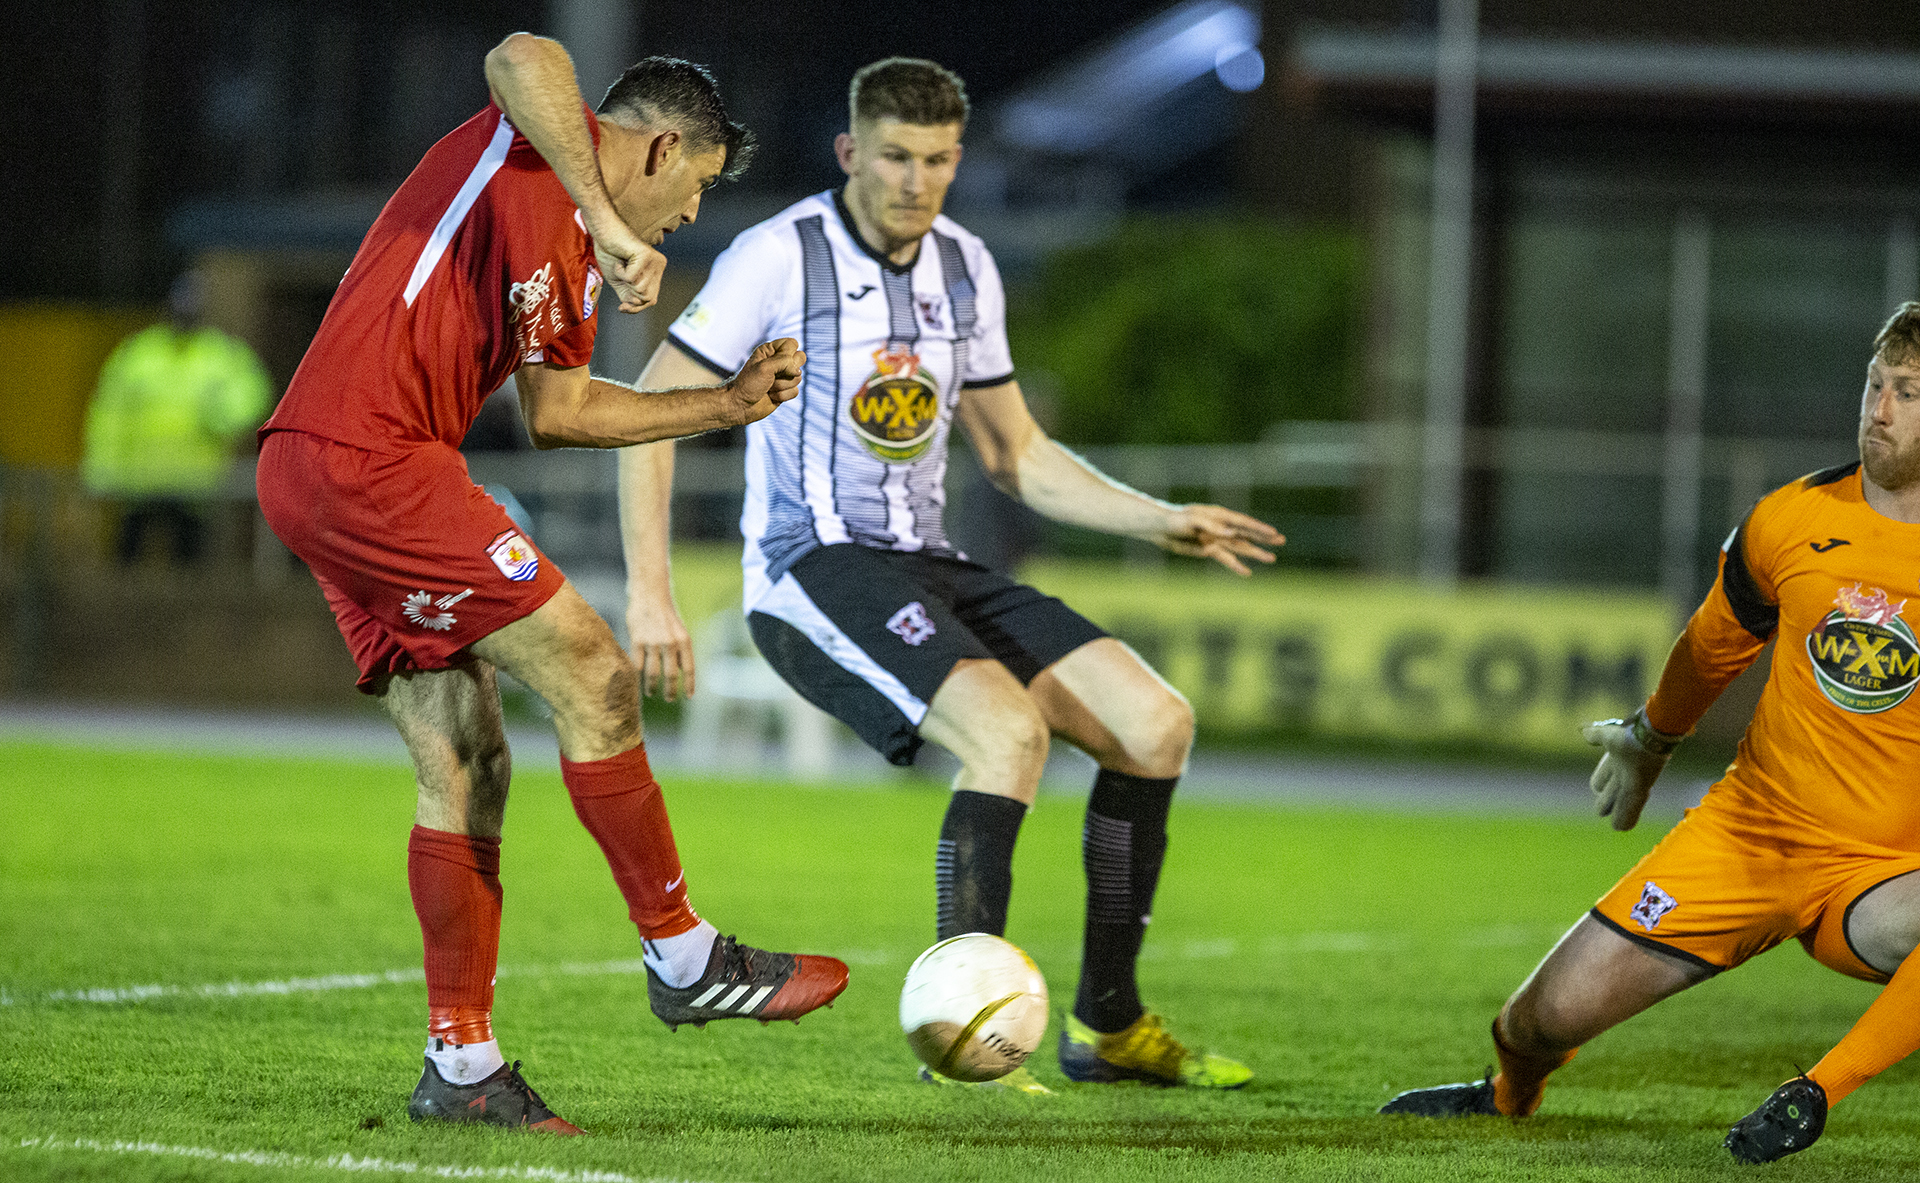 Mike Wilde is denied at close range in the second half | © NCM Media